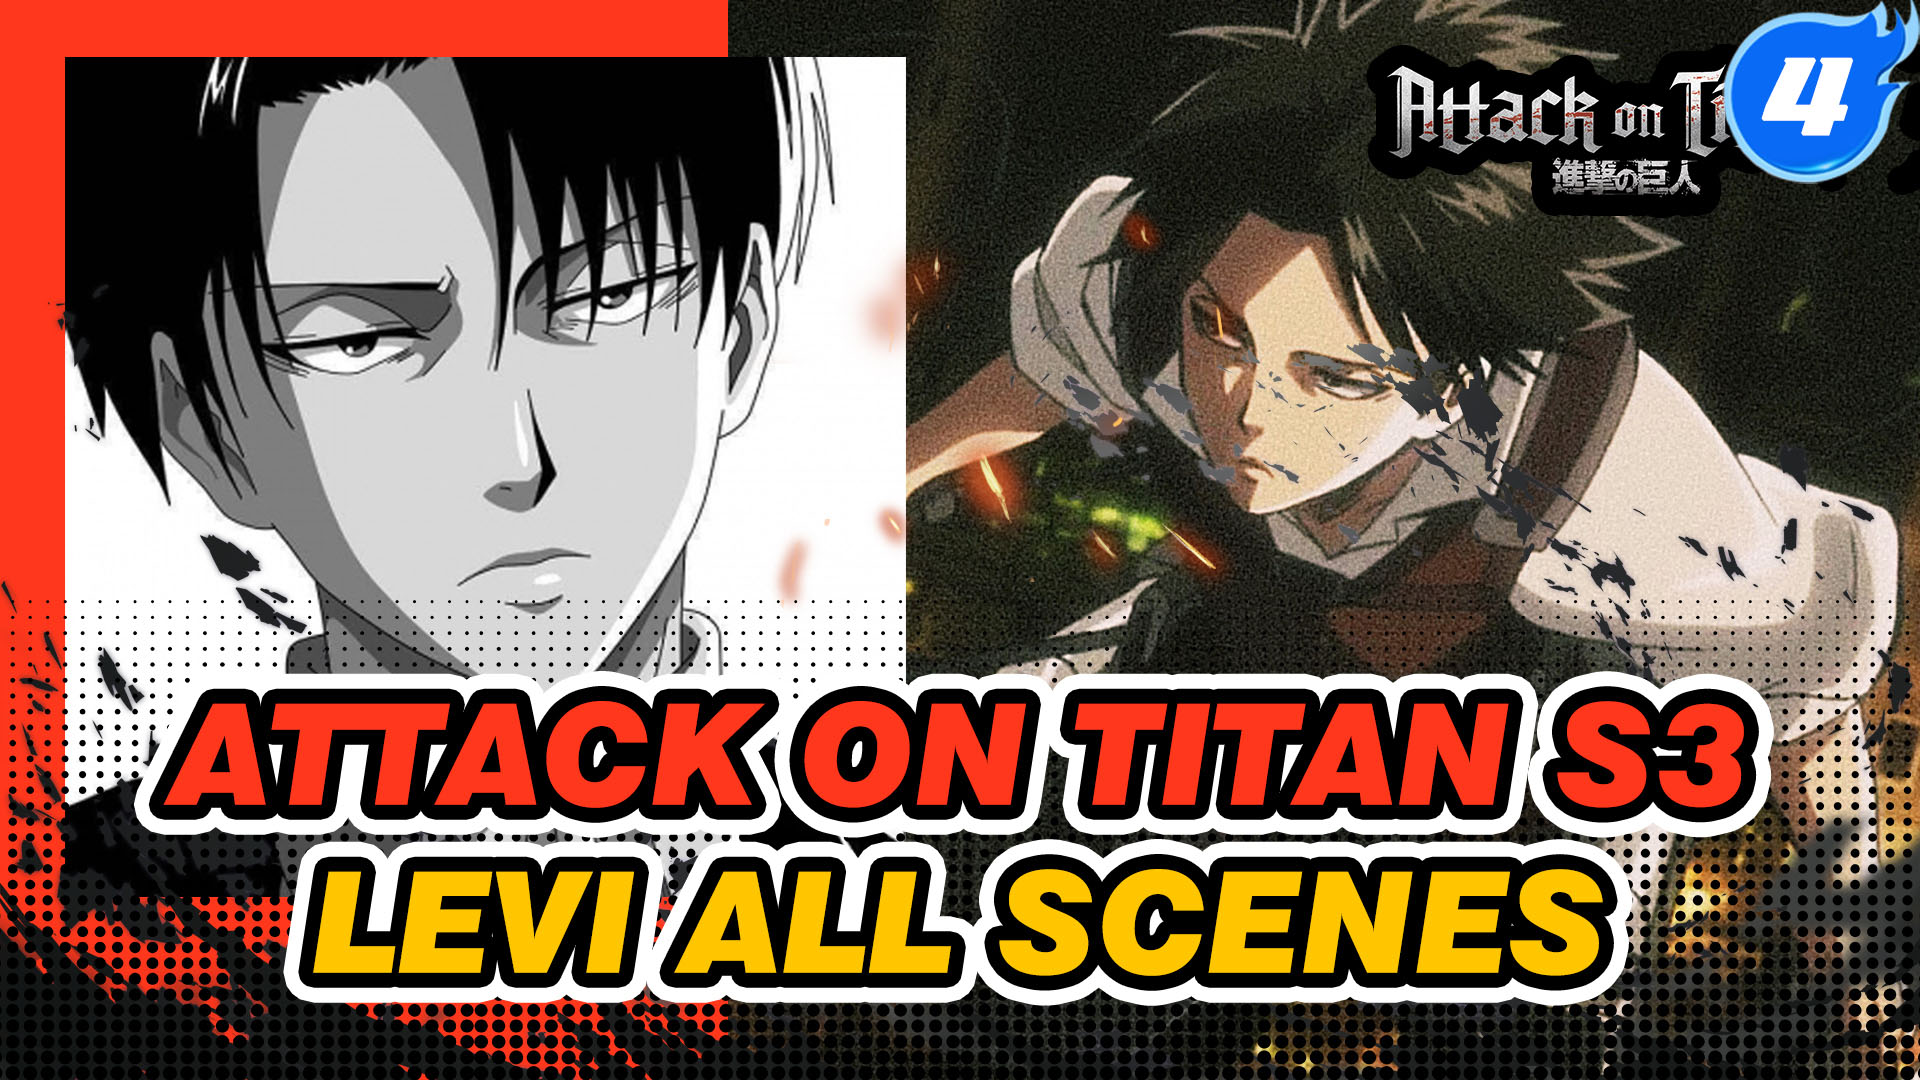 iQIYI - ✨Levi Ackerman stans, how are y'all feeling? Catch Attack on Titan  The Final Season Part 3 (1st Half), premiering 4 March on iQIYI!  Territories apply You can also binge watch